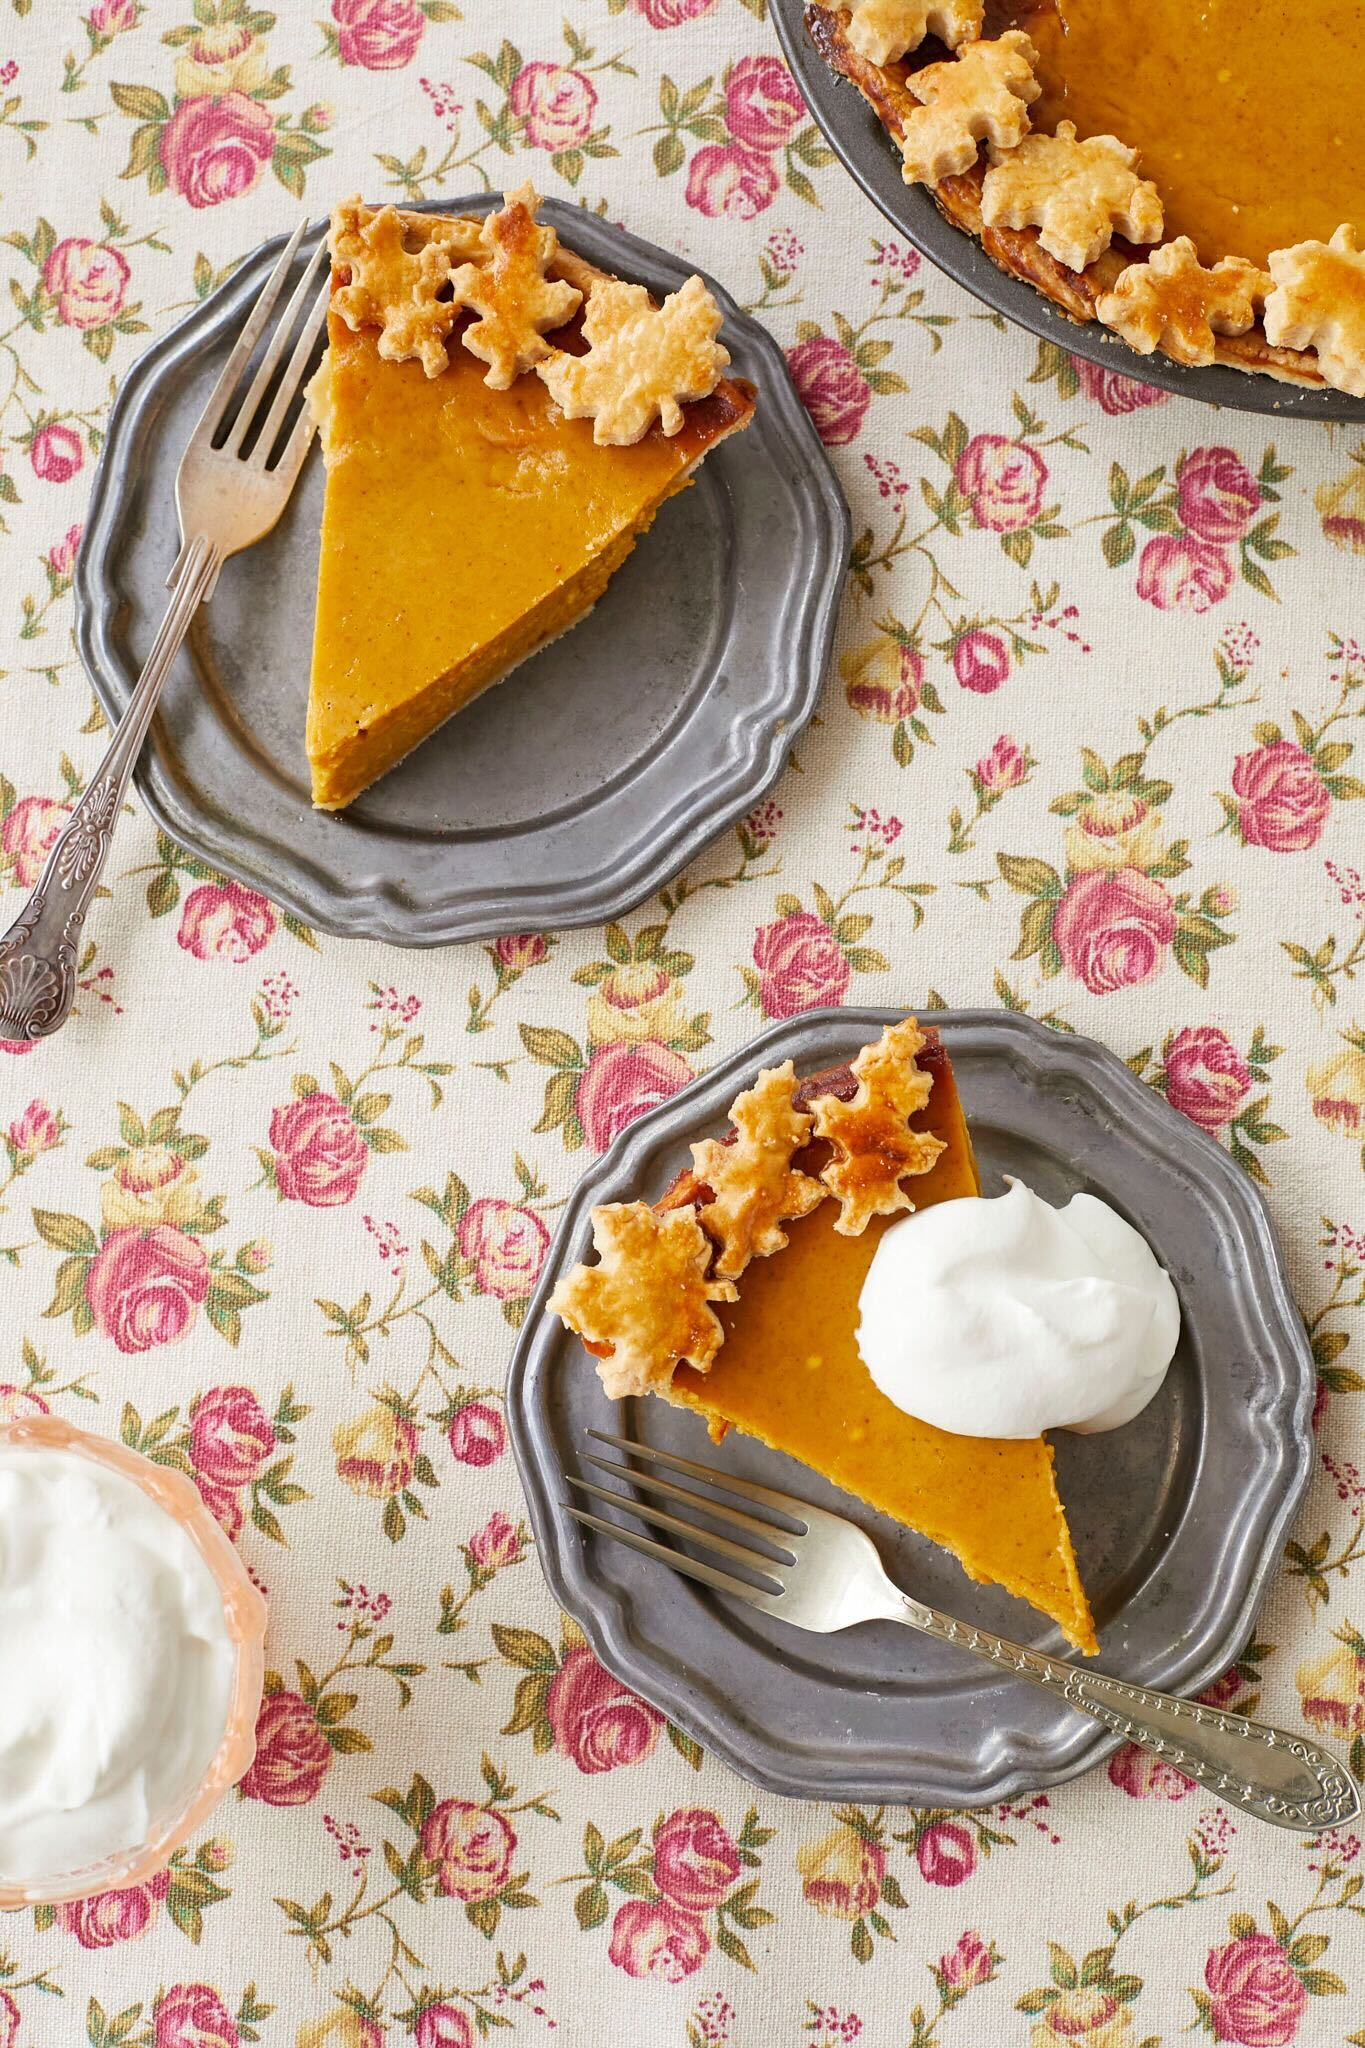 Two slices of homemade pumpkin pie are served on silver dishes. The pie is decorated with leaf-shaped pie crust cut outs and one slice of the pie is topped with a dollop of homemade whipped cream.